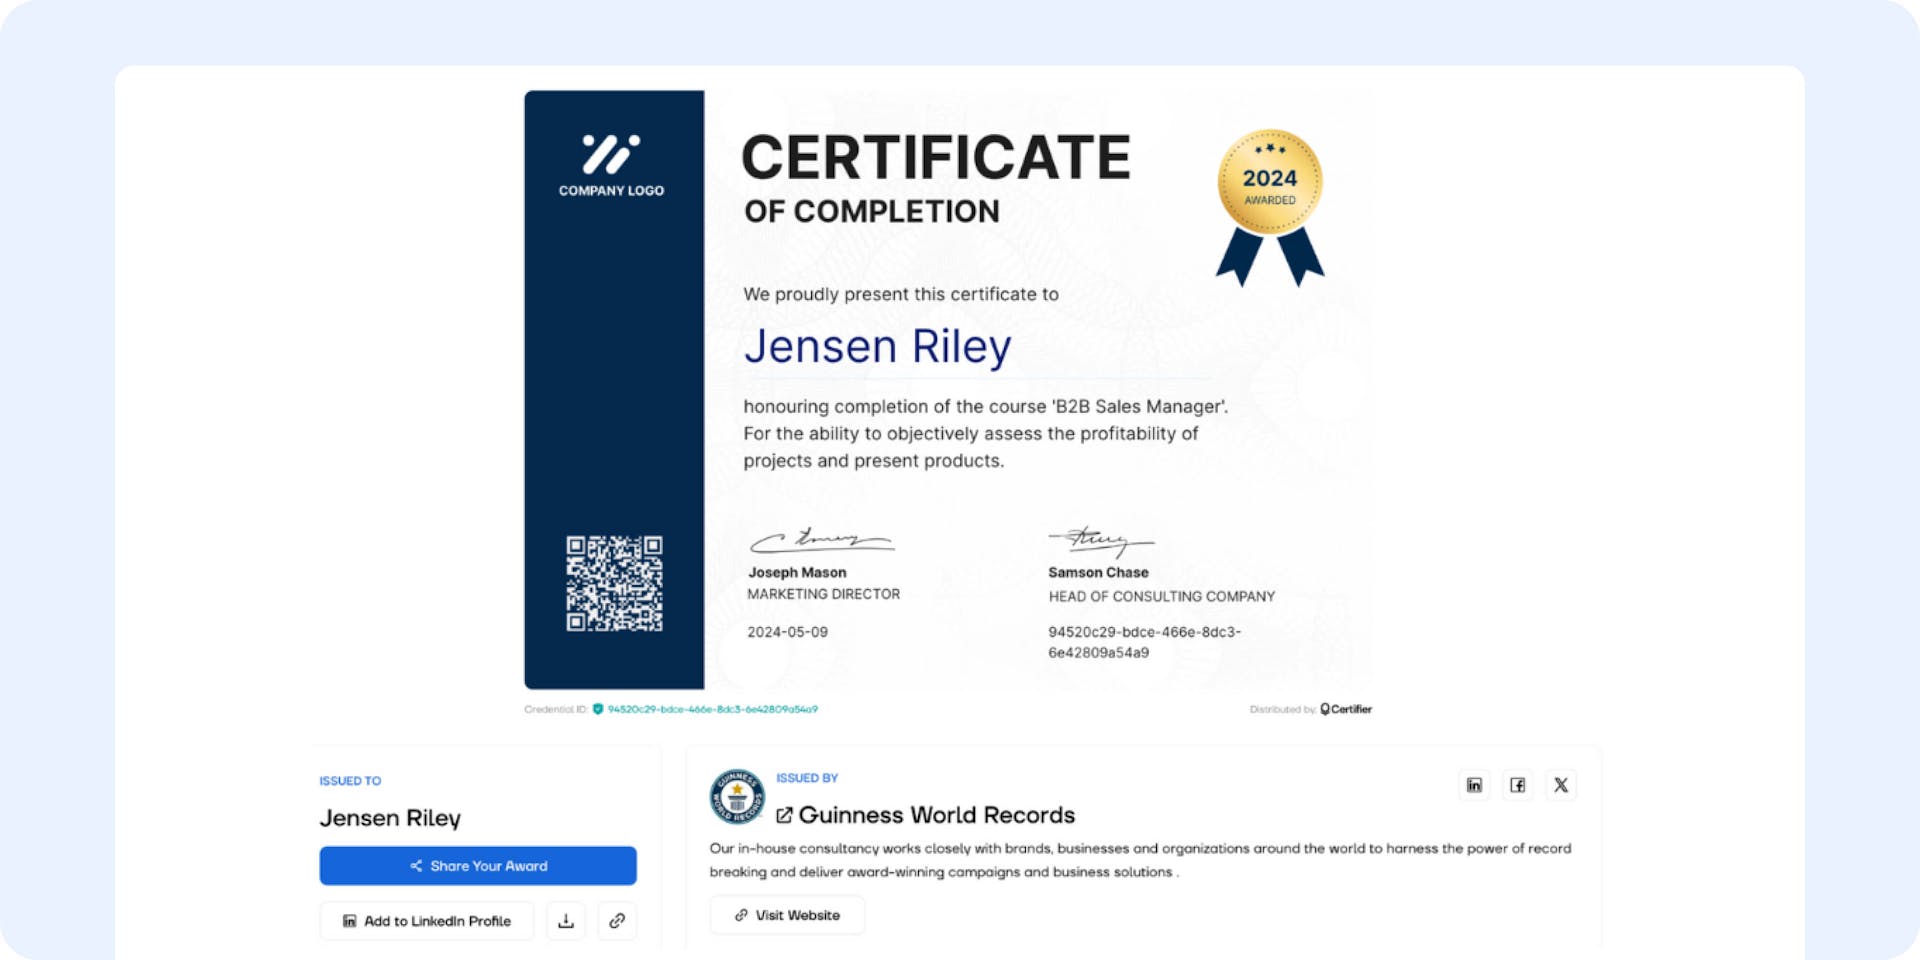 The verification page that can be accessed through the QR code on the certificate.